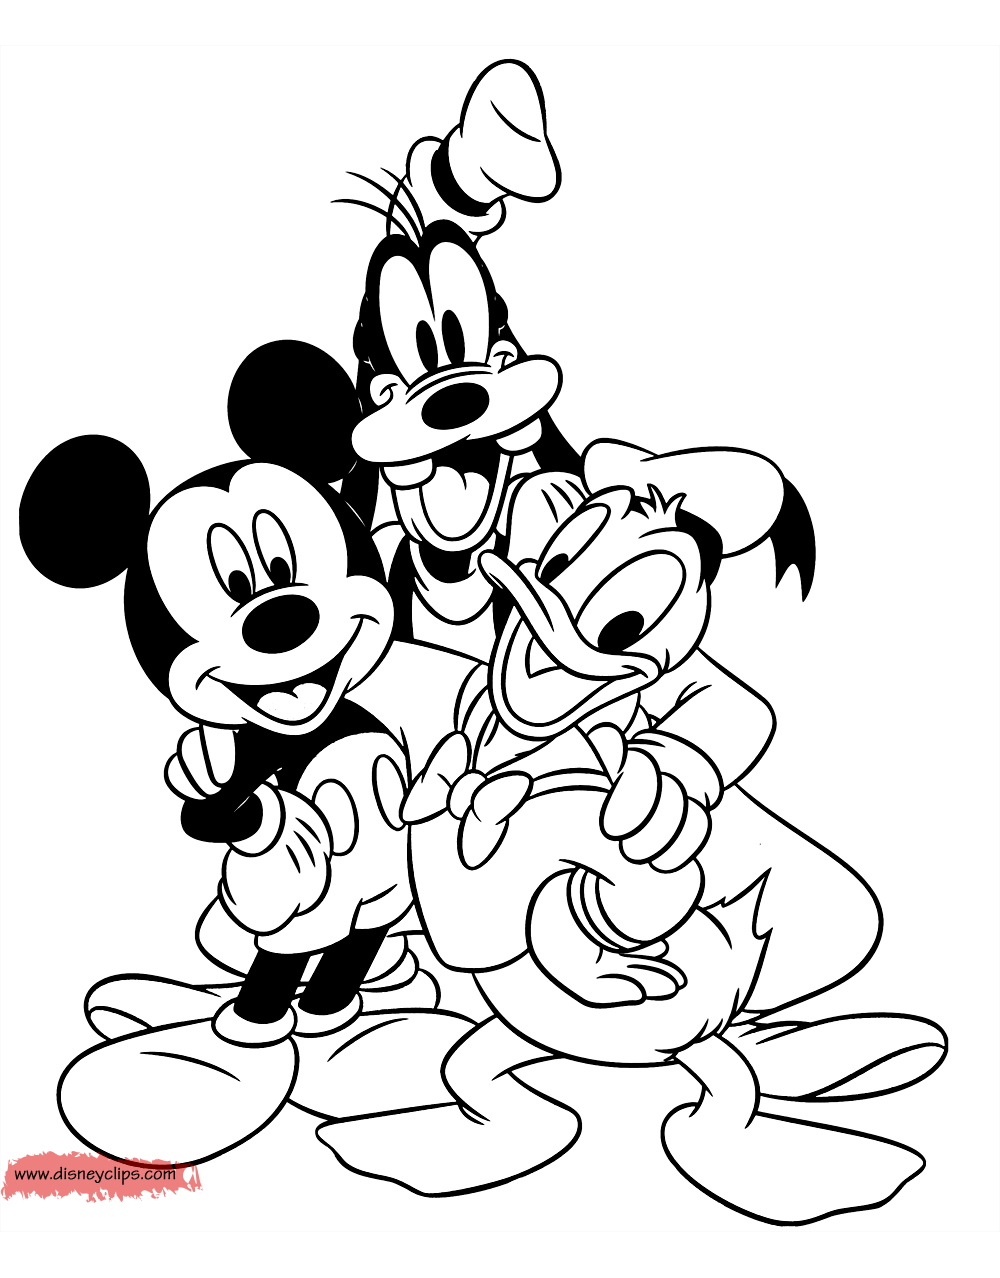 mickey mouse coloring page mickey mouse friends coloring pages 2 disney39s world coloring mickey page mouse 